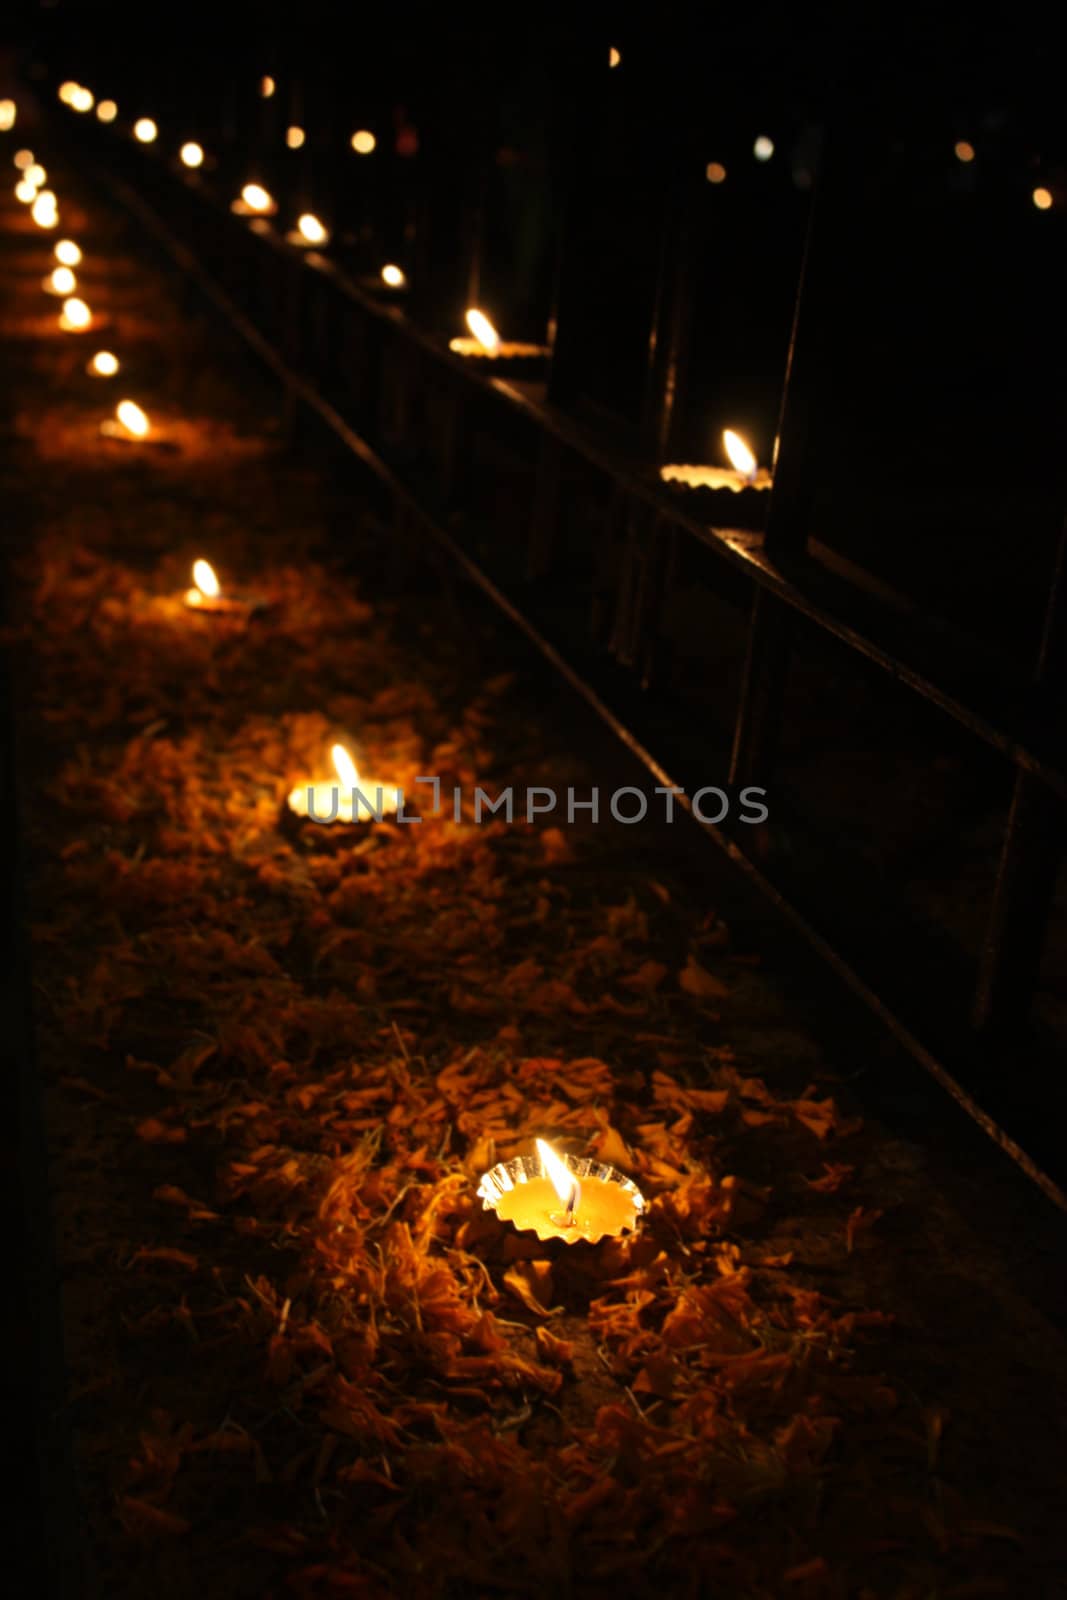 Beautiful Diwali lamps arranged traditionally with flower petals.